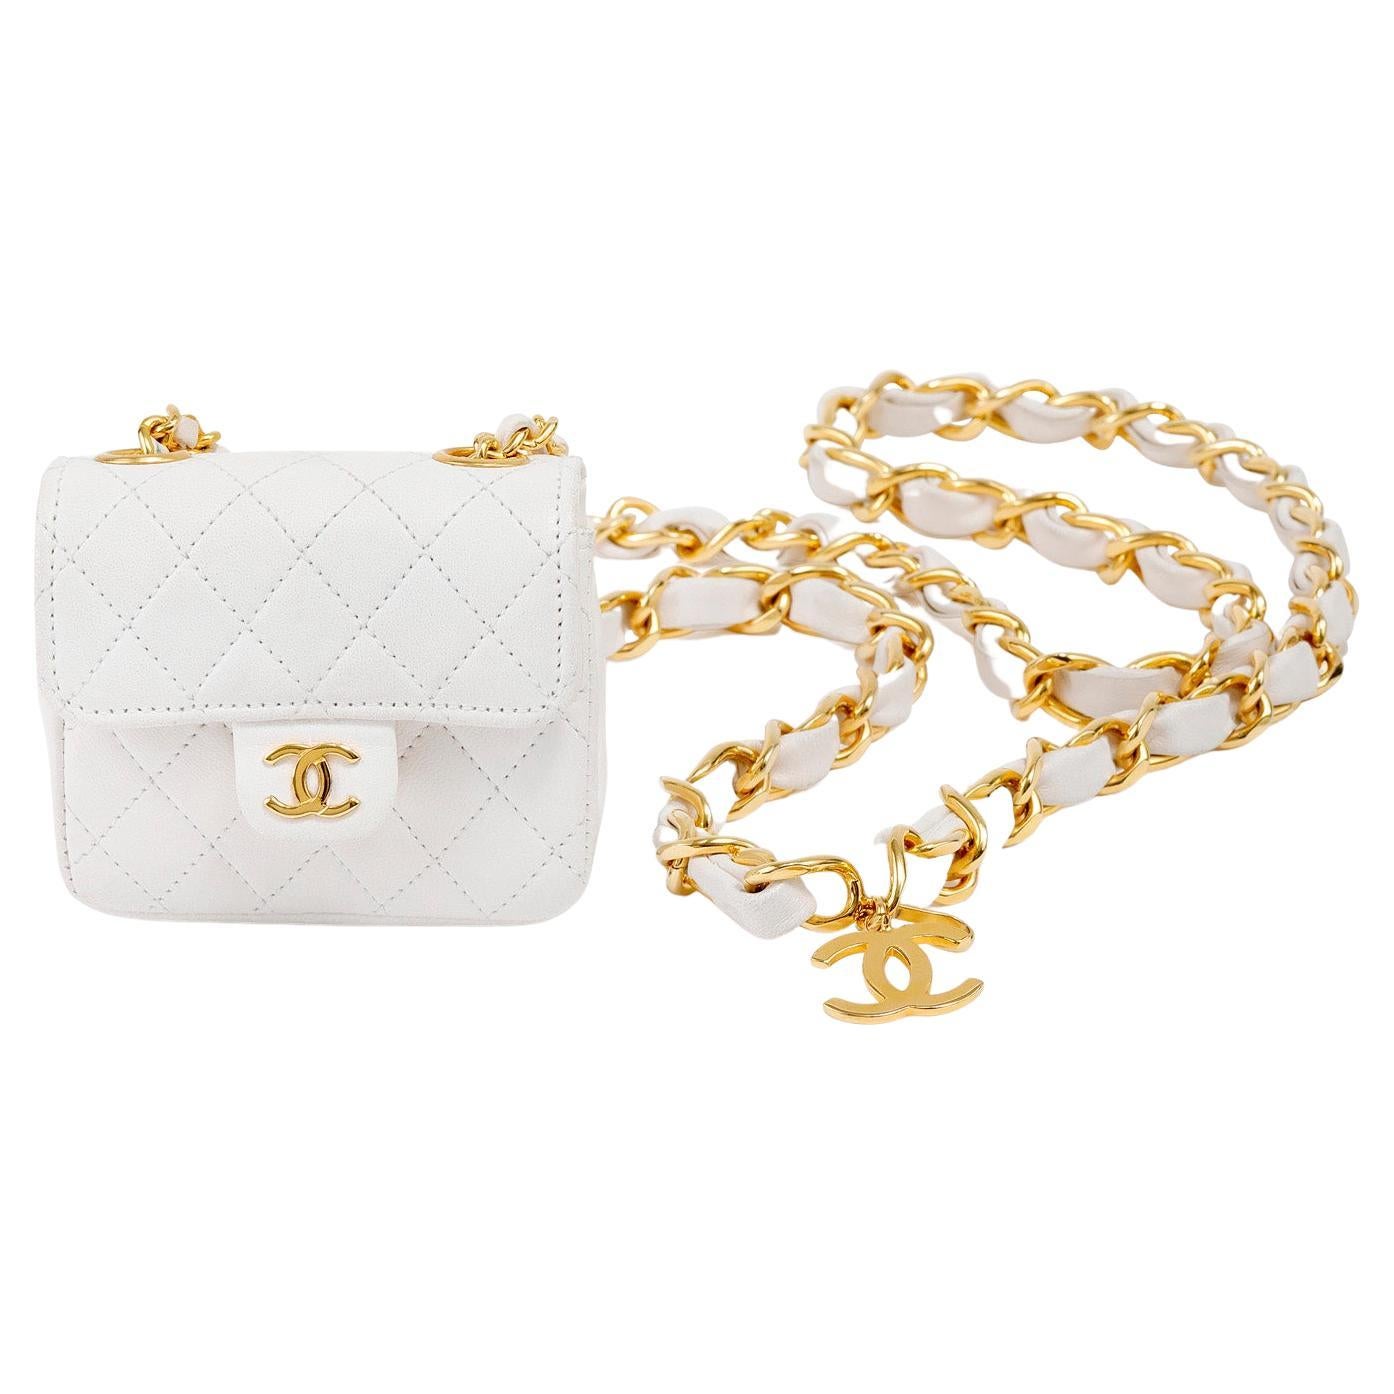 Chanel Vintage White Quilted Lambskin Micro Belt Bag Gold Hardware  20022003 Available For Immediate Sale At Sothebys